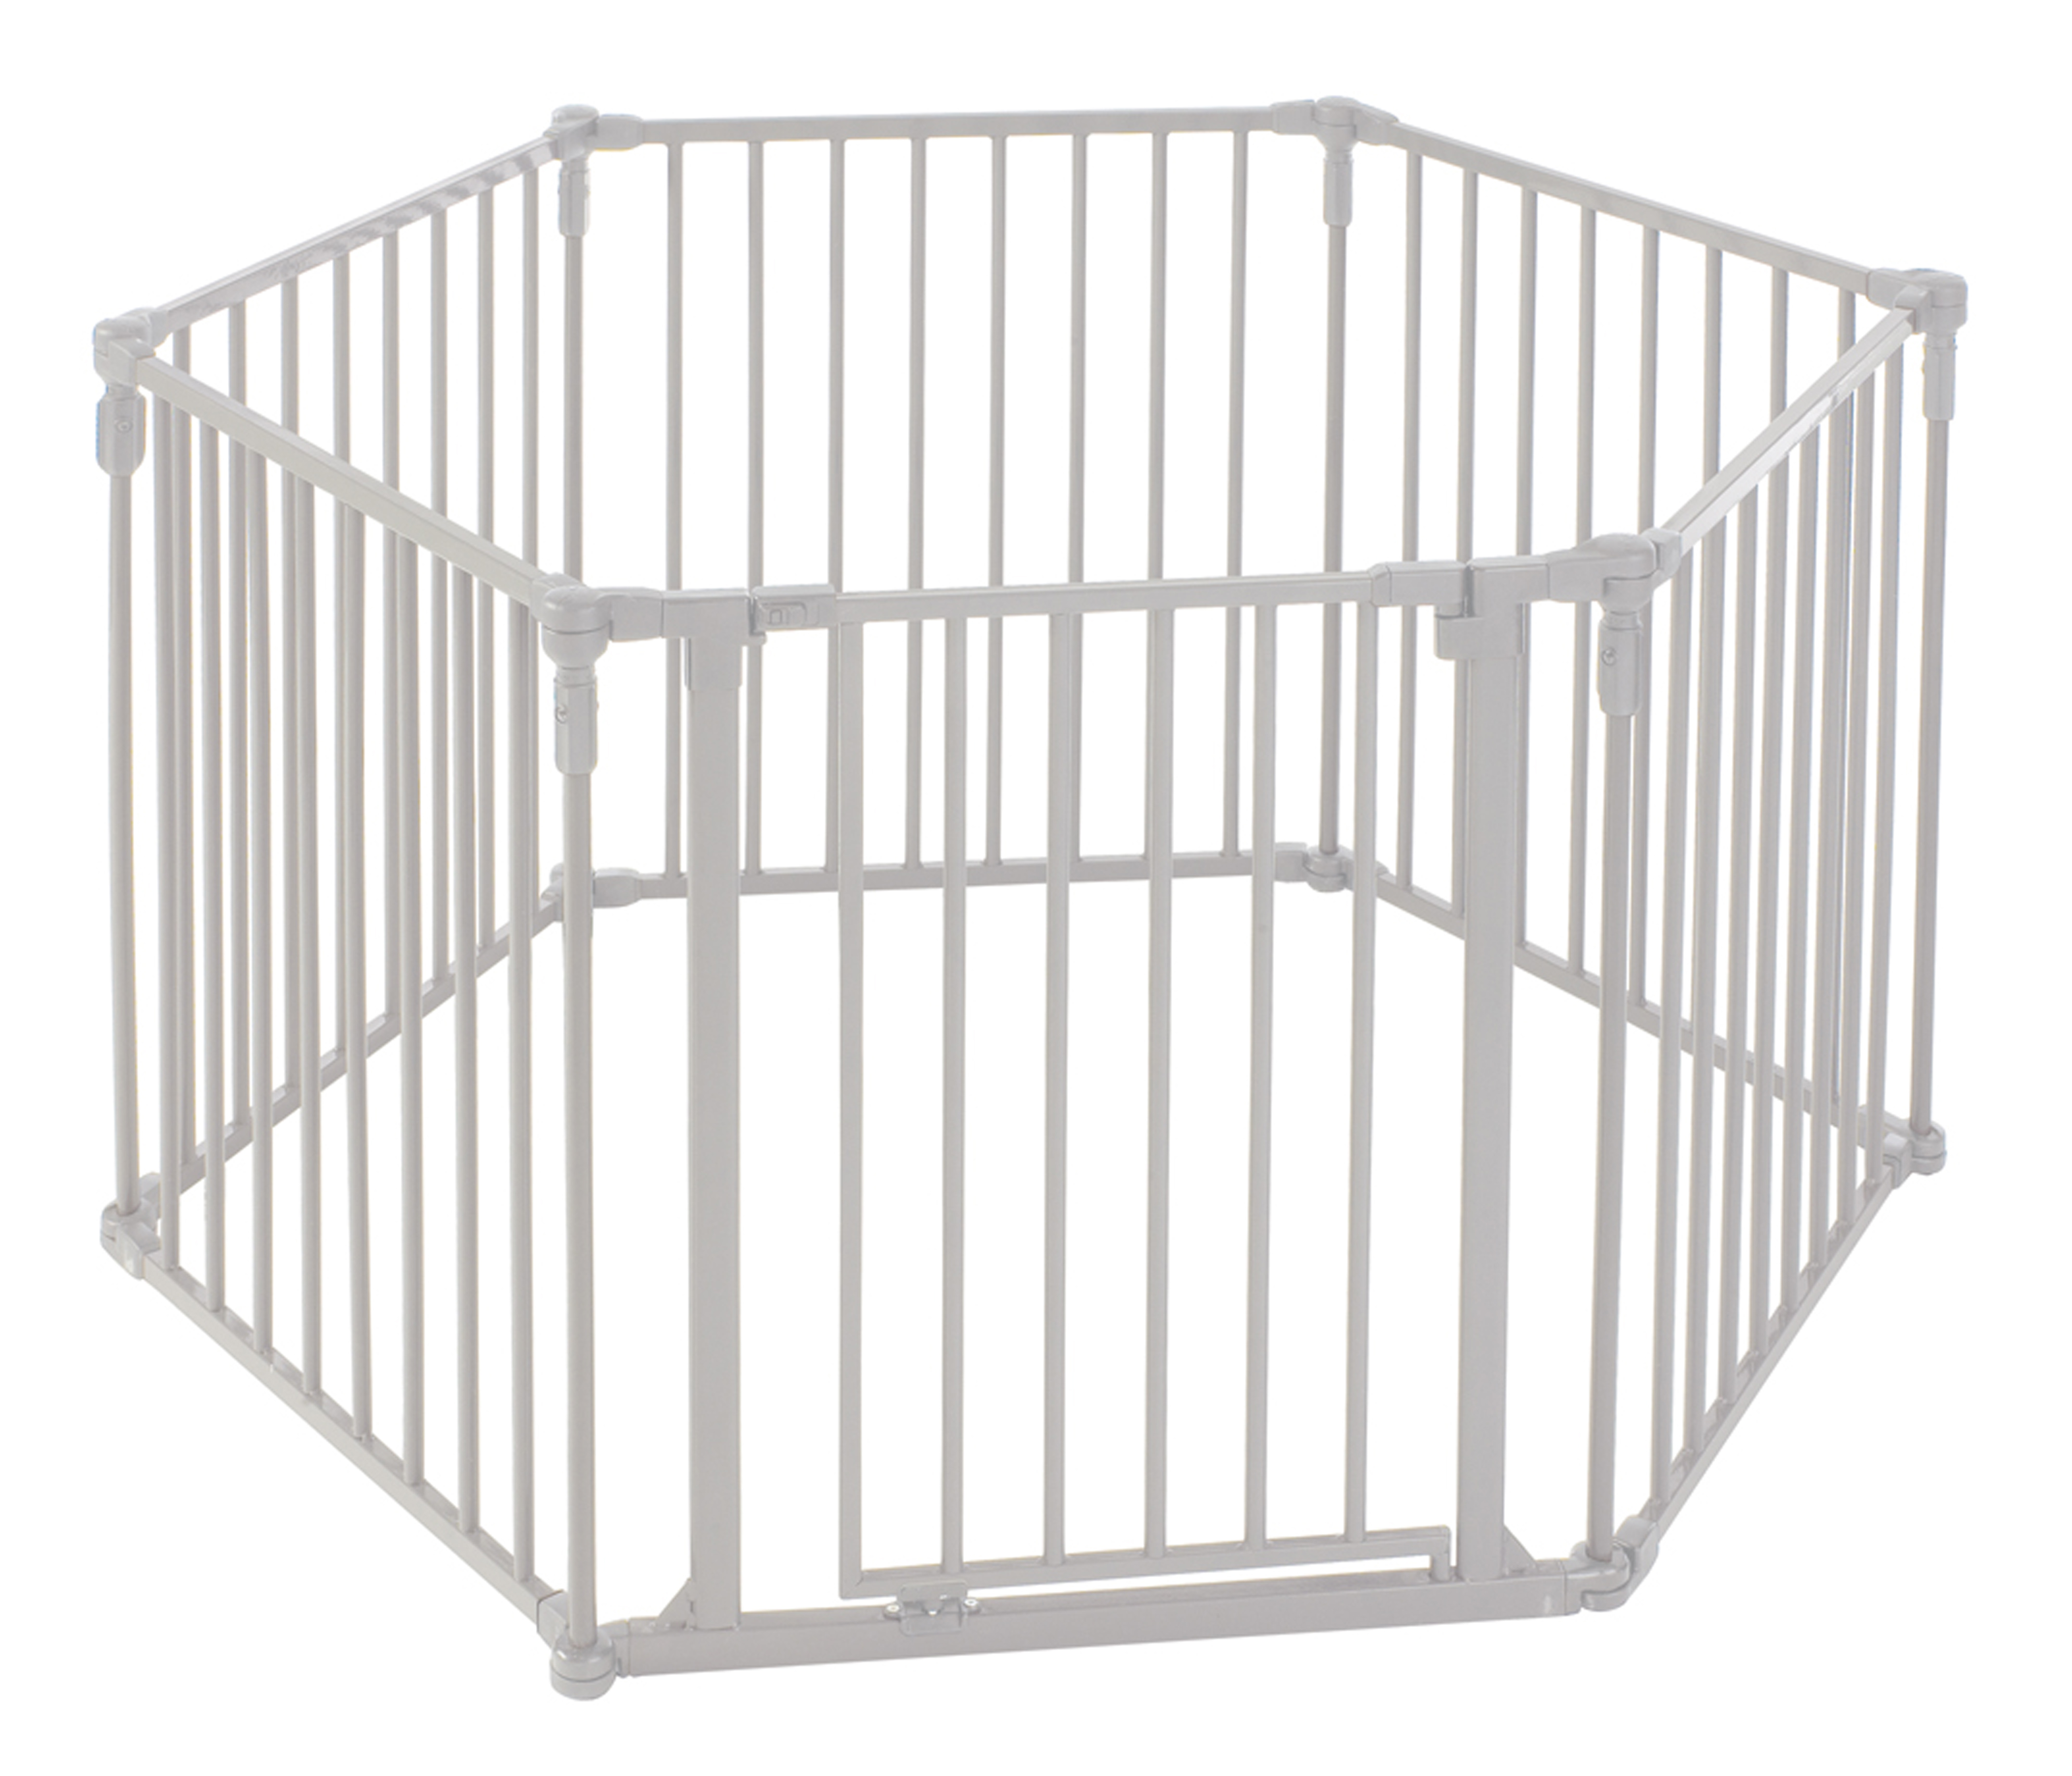 Toddleroo by North States 3-in-1 Superyard Baby Extra Wide Gate & Play Yard, Taupe Metal - image 2 of 12